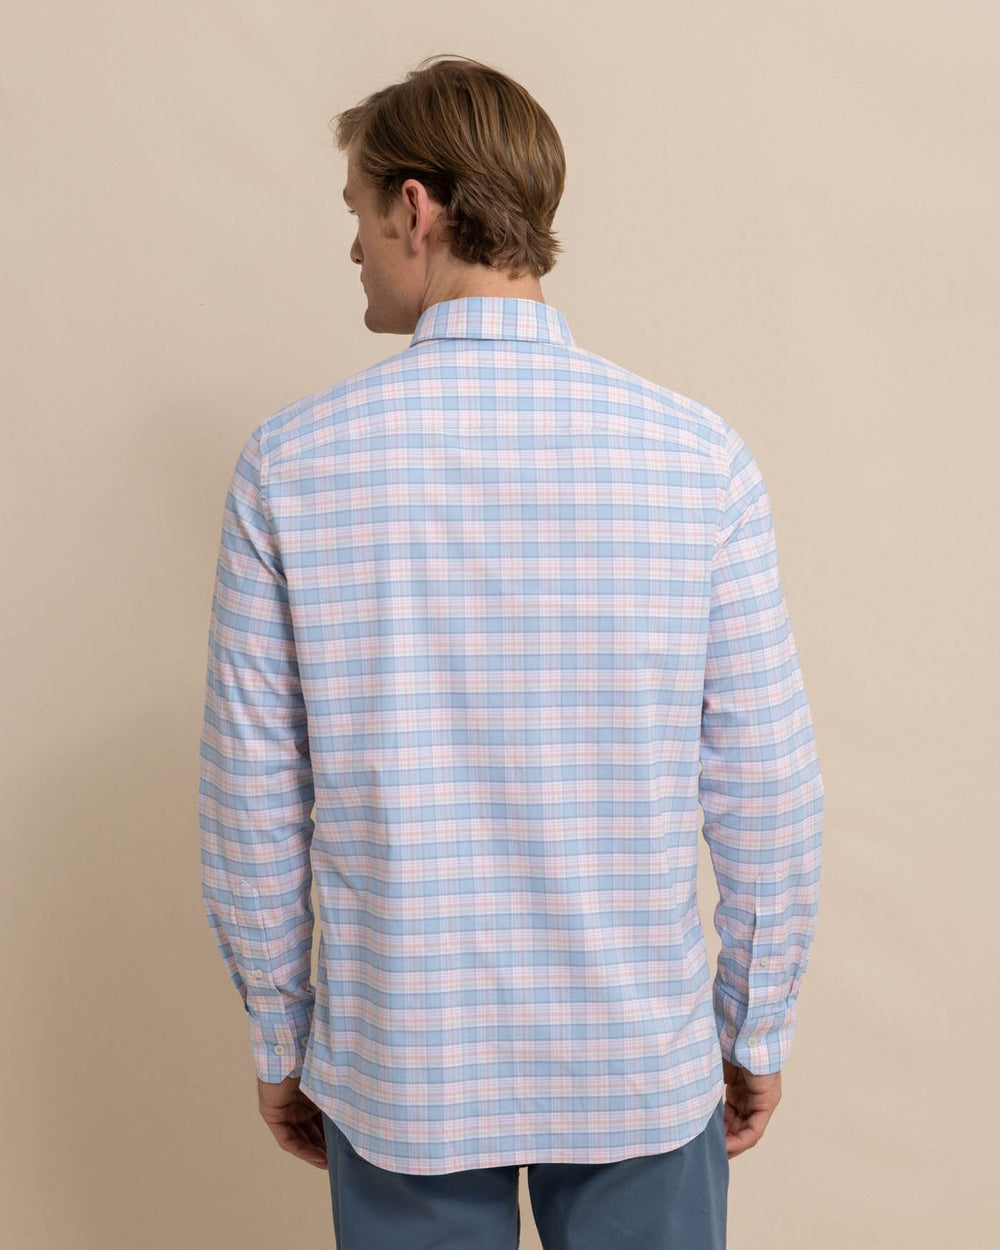 The back view of the Southern Tide Coastal Passage Brockman Plaid Long Sleeve SportShirt by Southern Tide - Clearwater Blue